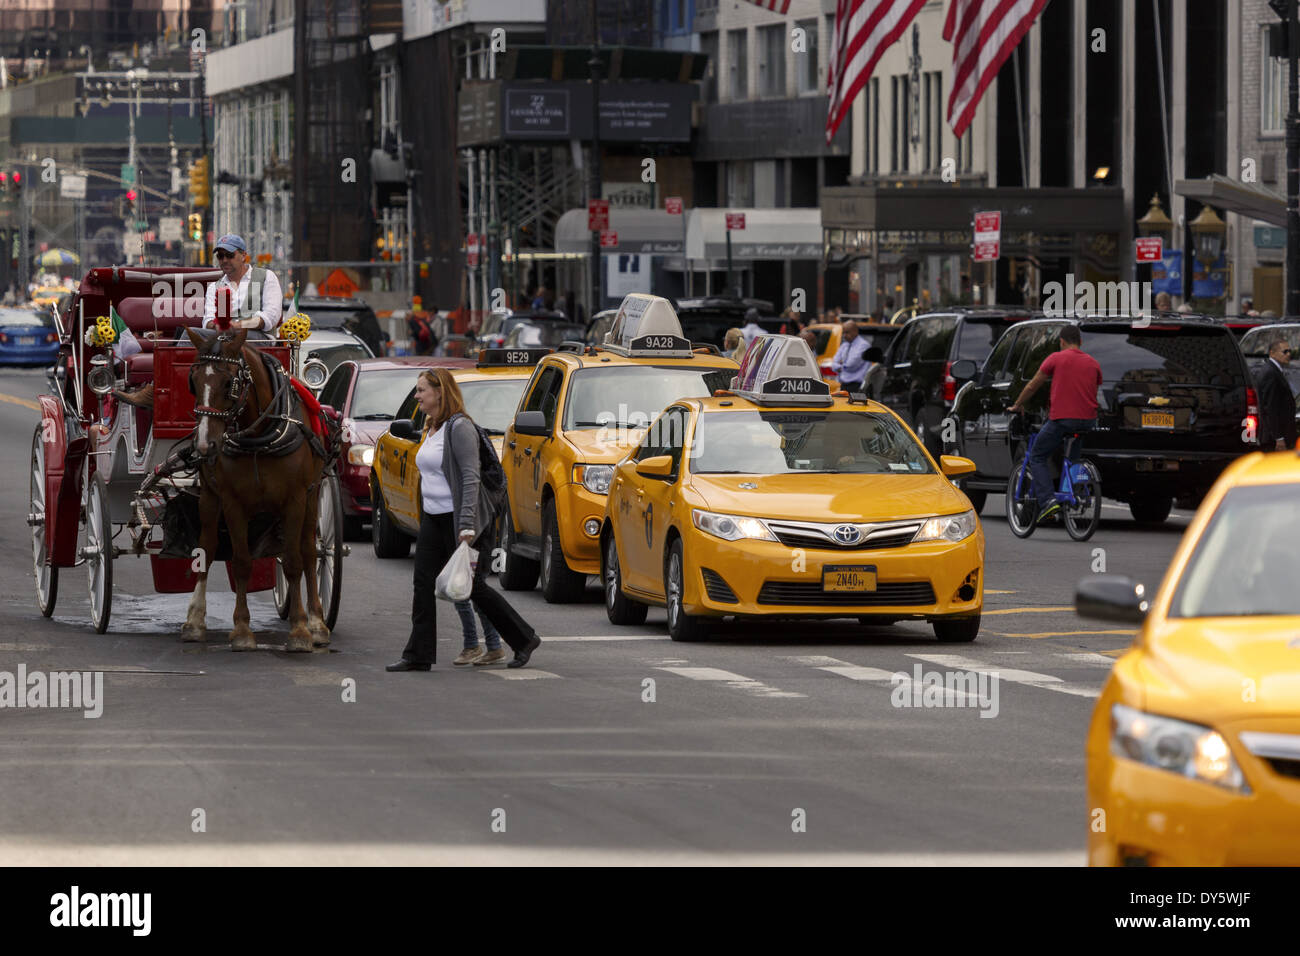 Pedestrians on crosswalk yellow taxis and horse and carriage waiting Stock Photo